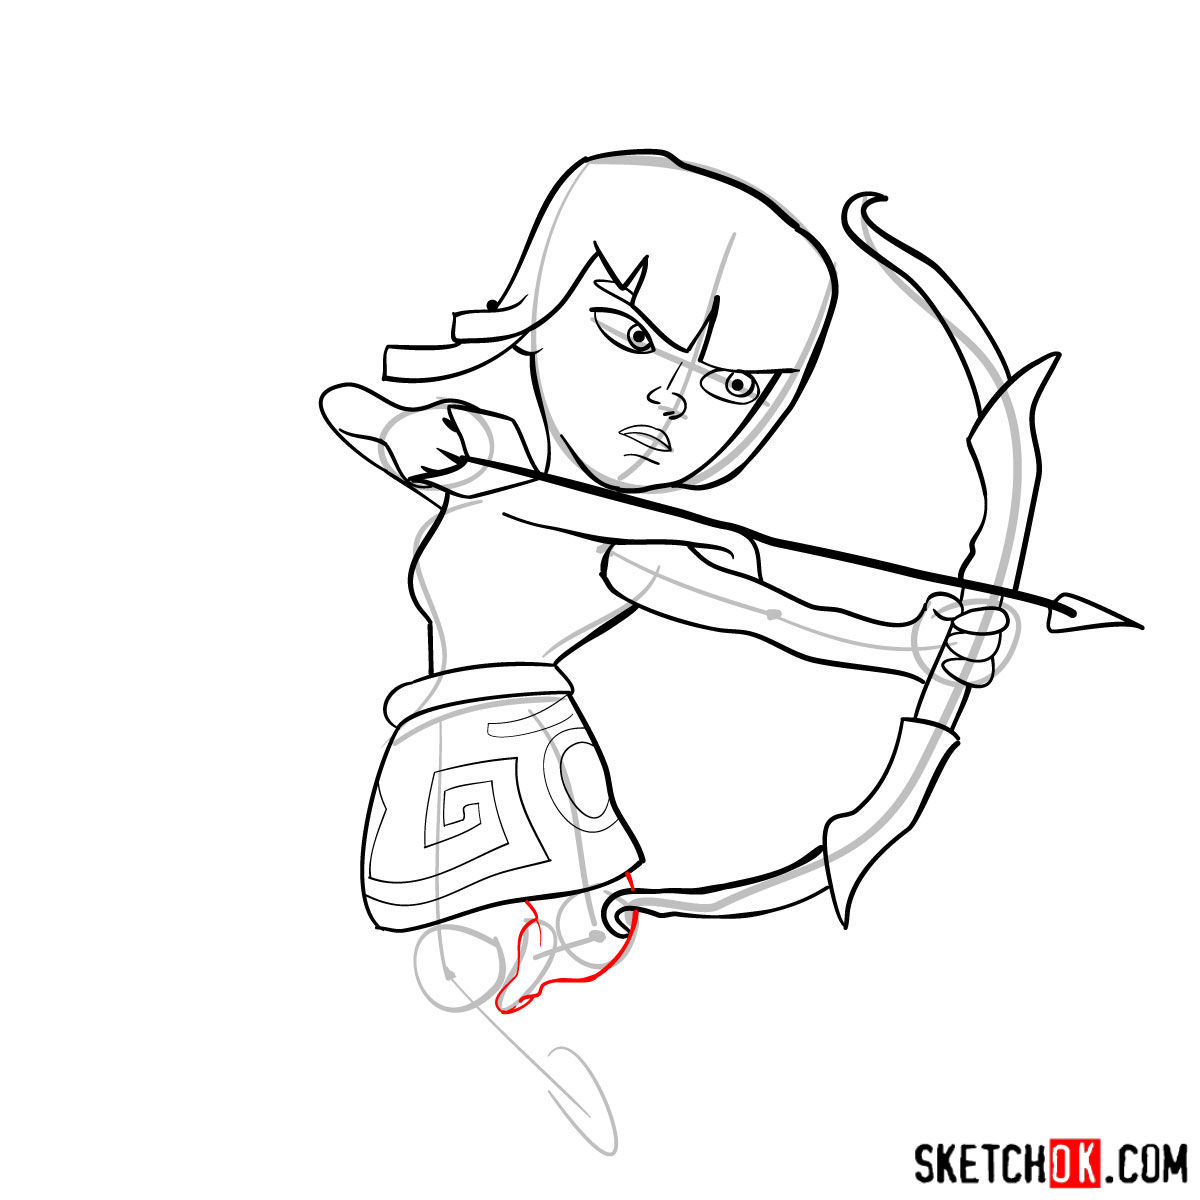 How to draw Archer from Clash of Clans - step 08